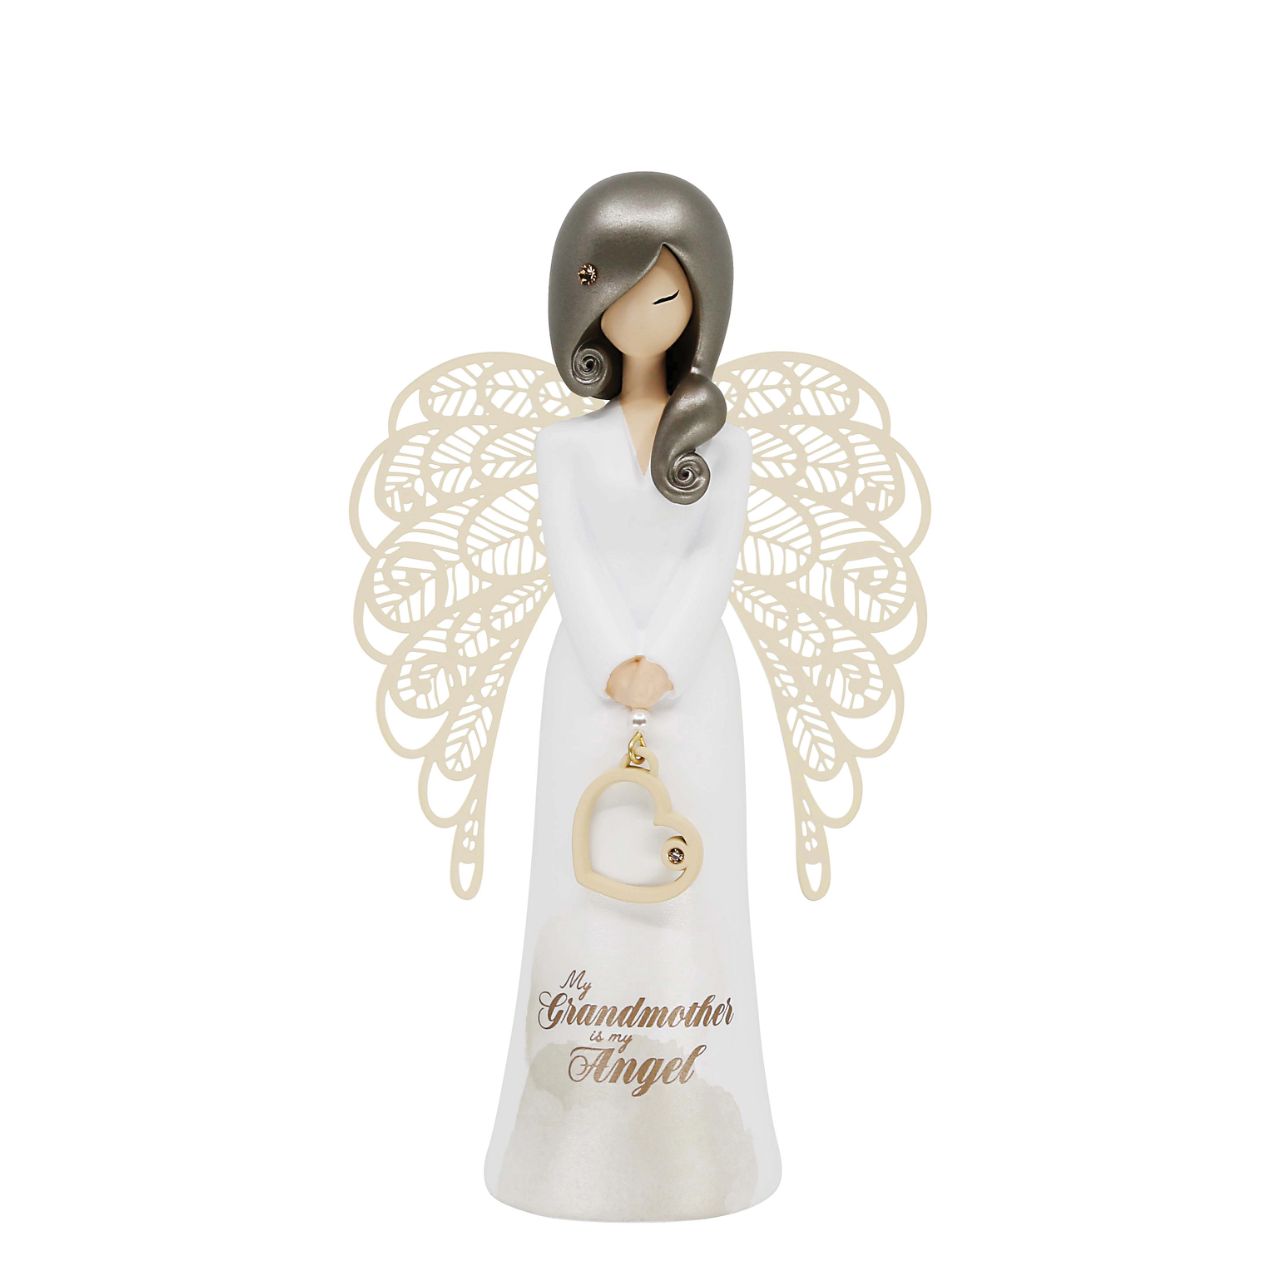 Thank You Angel Figurine - Grandmother  Looking for a thoughtful gift that's both beautiful and meaningful? These stunning angels are the perfect way to show someone special just how much they mean to you. Standing 15.5cm tall, they are perfect as a gift and home decoration.